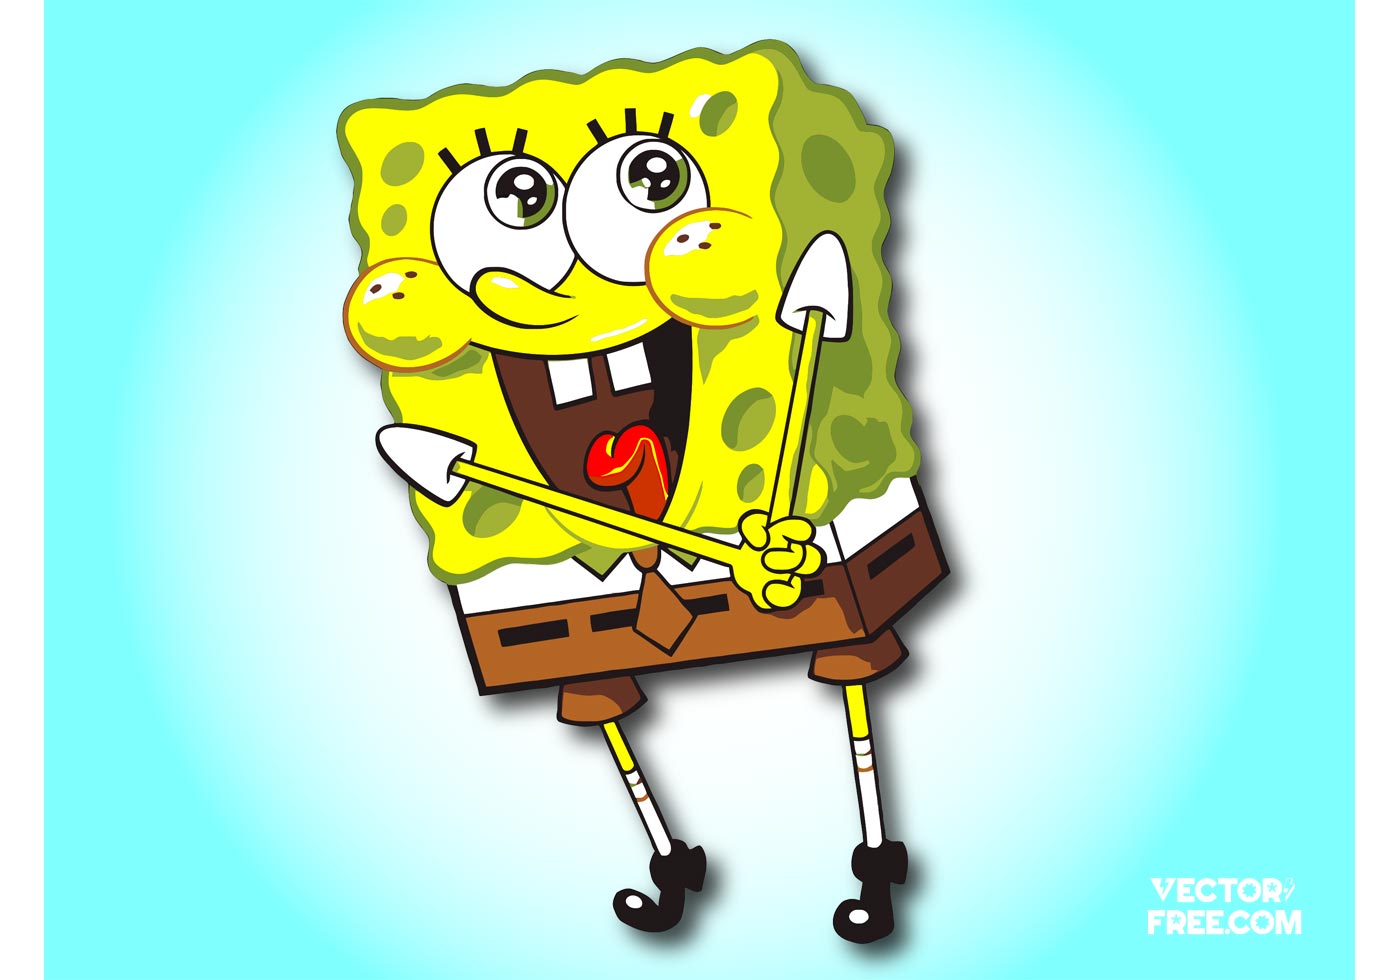 about spongebob character pdf download